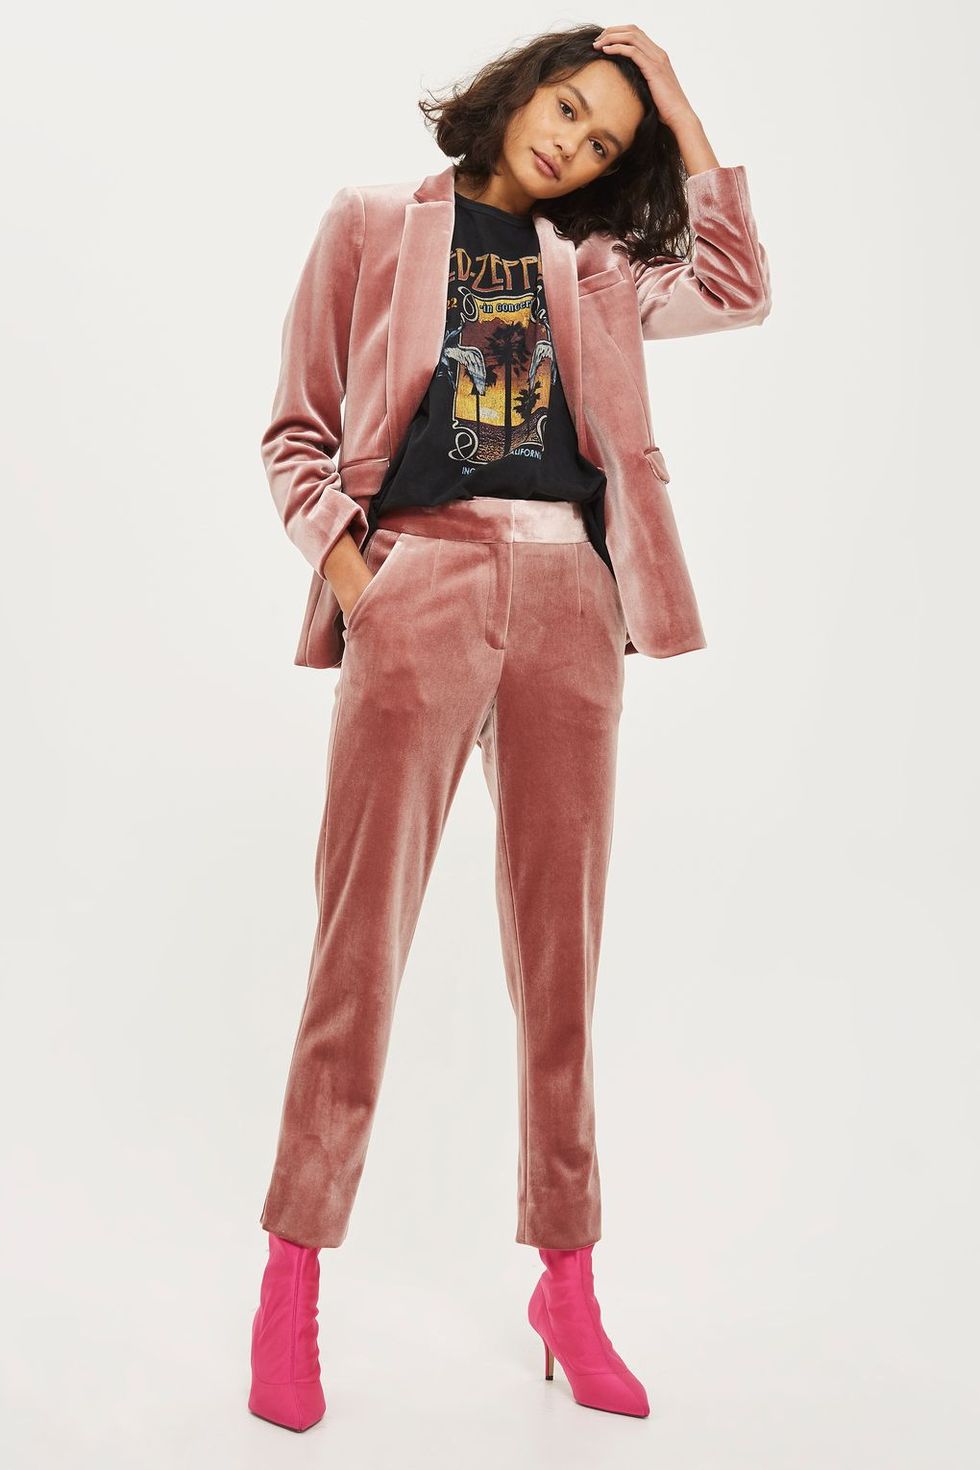 This pink velvet suit from Topshop is selling out